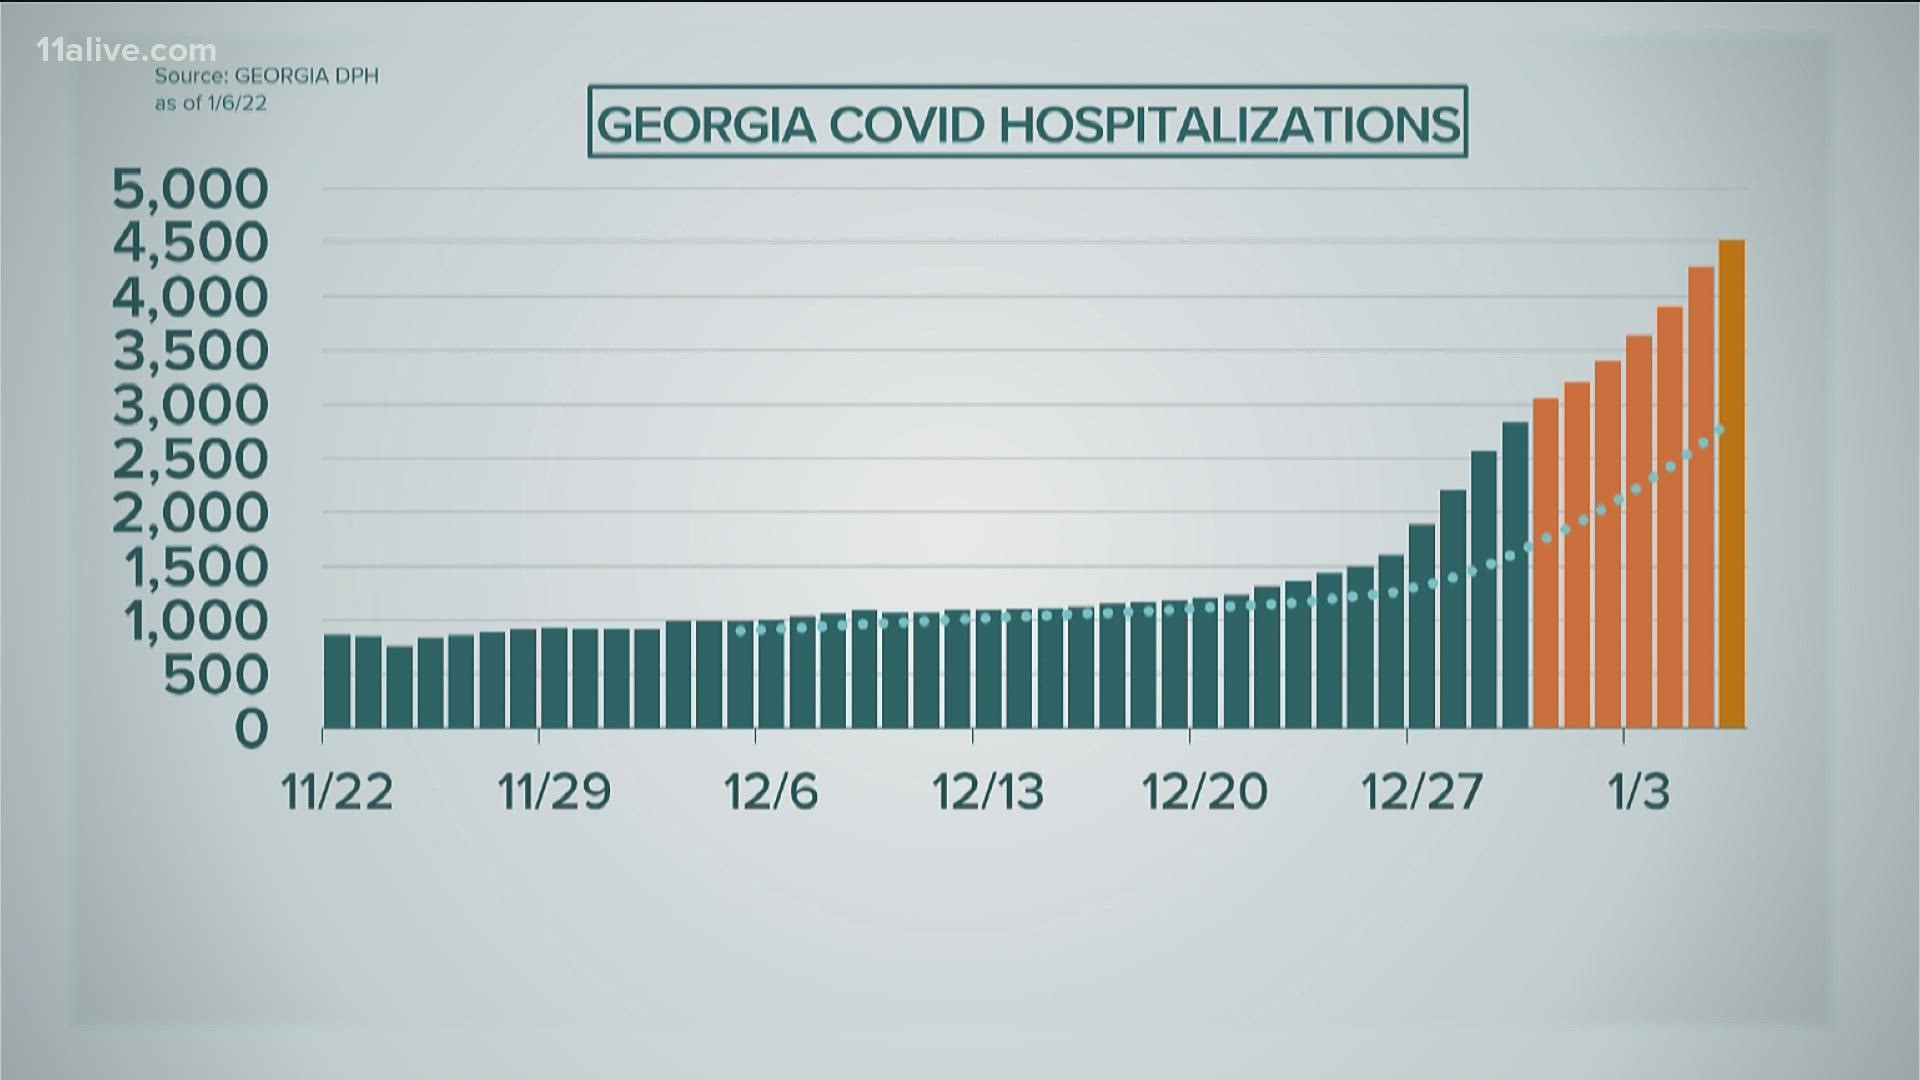 Georgia is continuing to see a surge in COVID-19 cases.